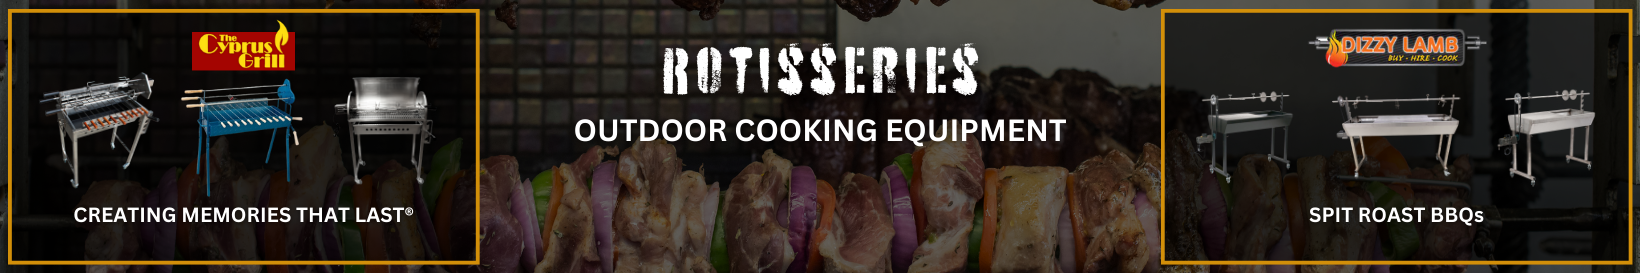 buy cyprus grills rotisseries outdoor equipment for sale the bbq store sydney